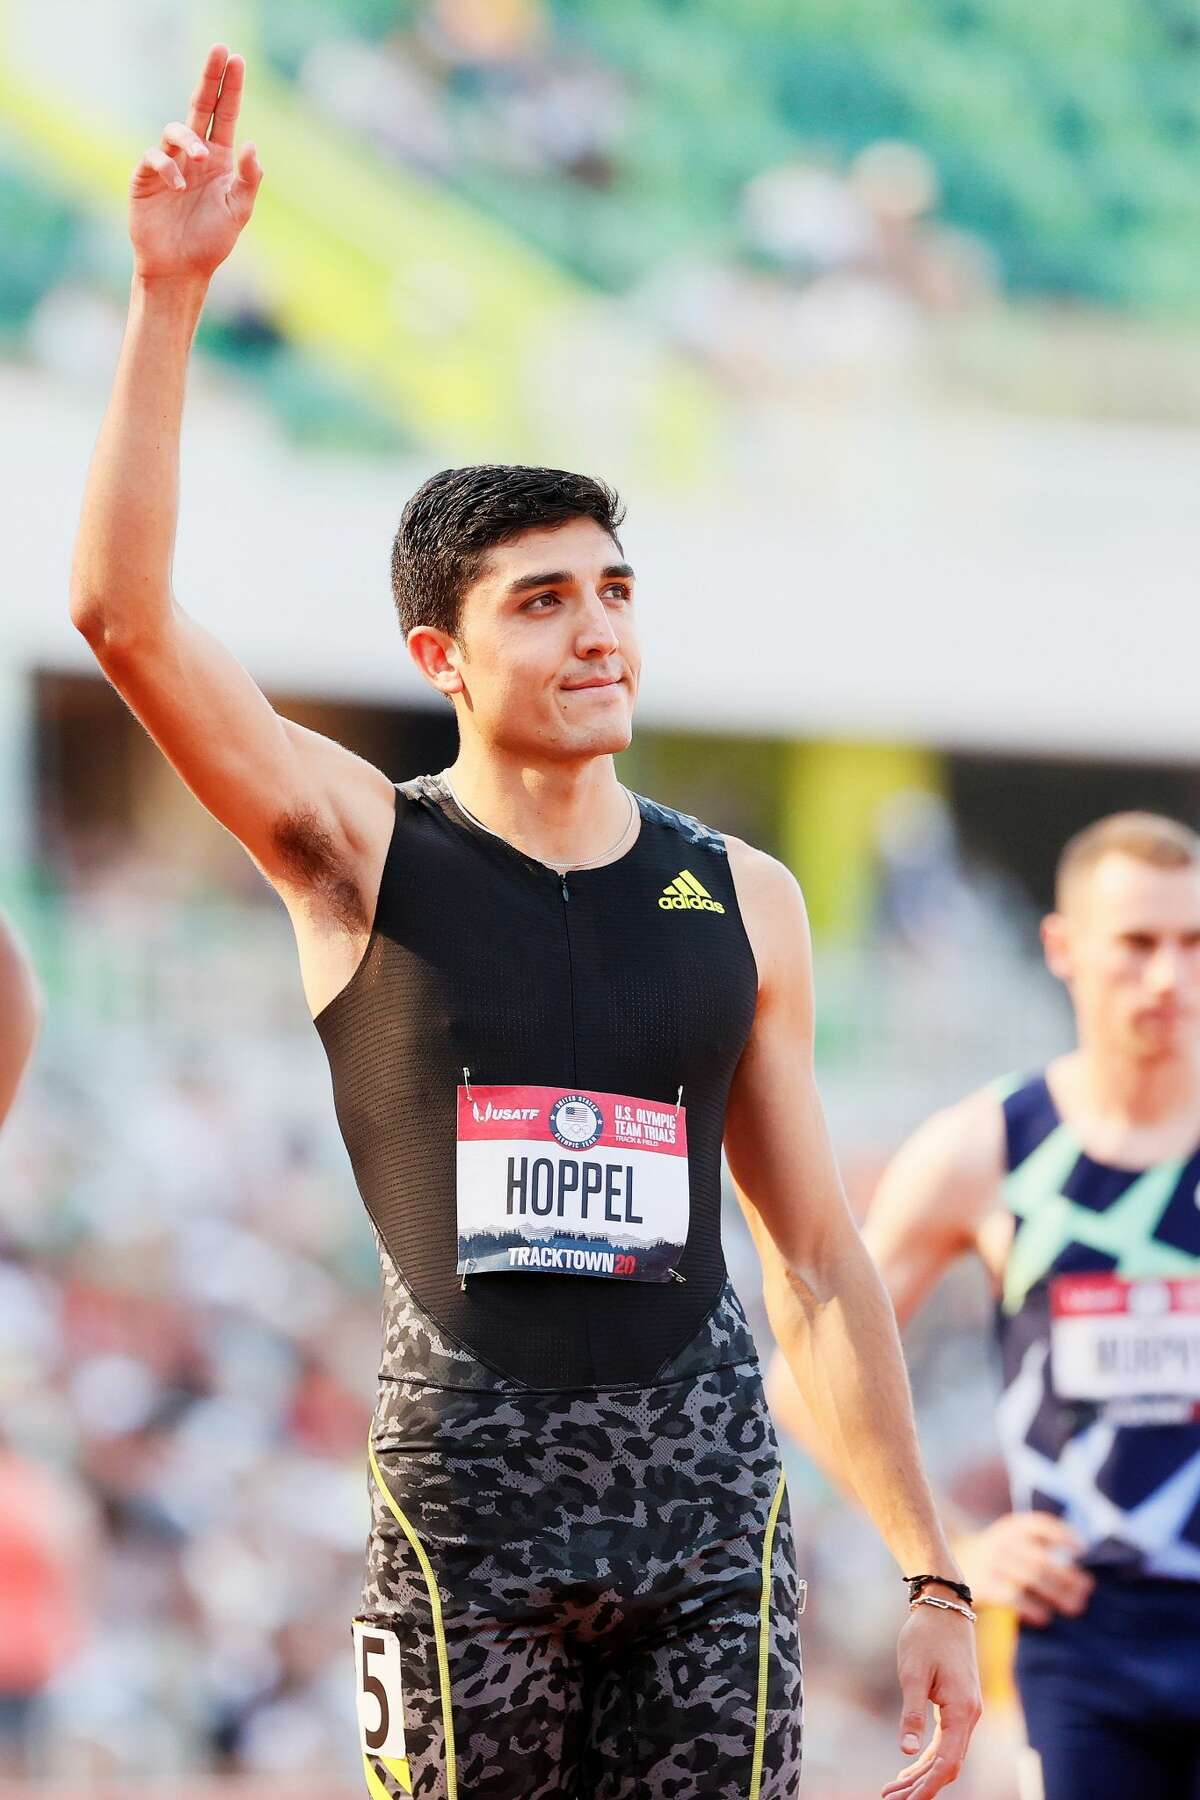 Bryce Hoppel celebrates after the Men's 800 Meters Final during day four of the 2020 U.S. Olympic Track & Field Team Trials at Hayward Field on June 21, 2021 in Eugene, Oregon. (Photo by Steph Chambers/Getty Images)